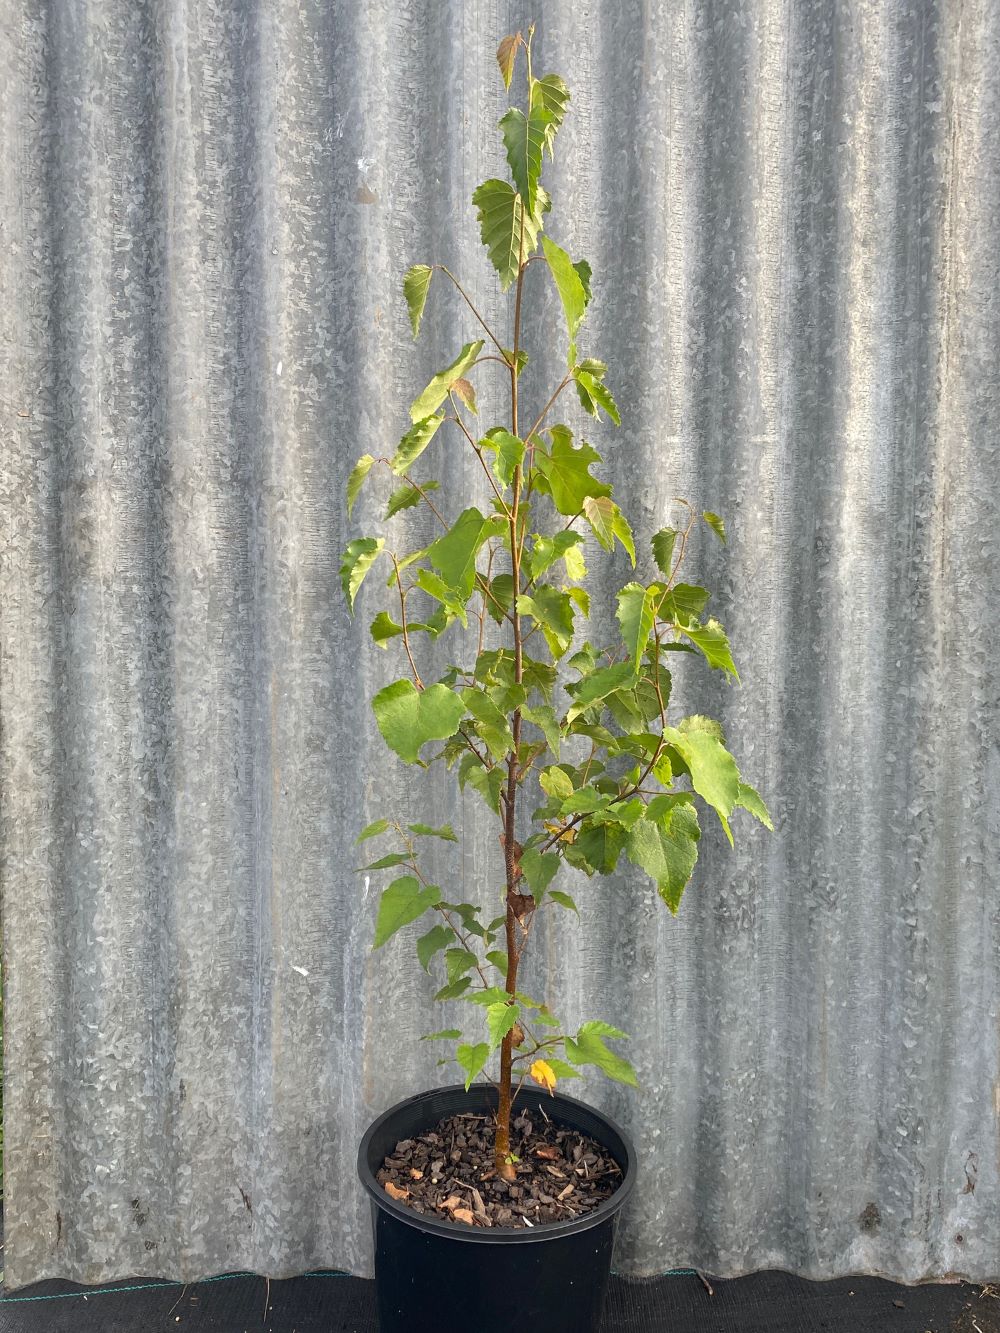 Young Japanese White Birch tree in 200mm pot